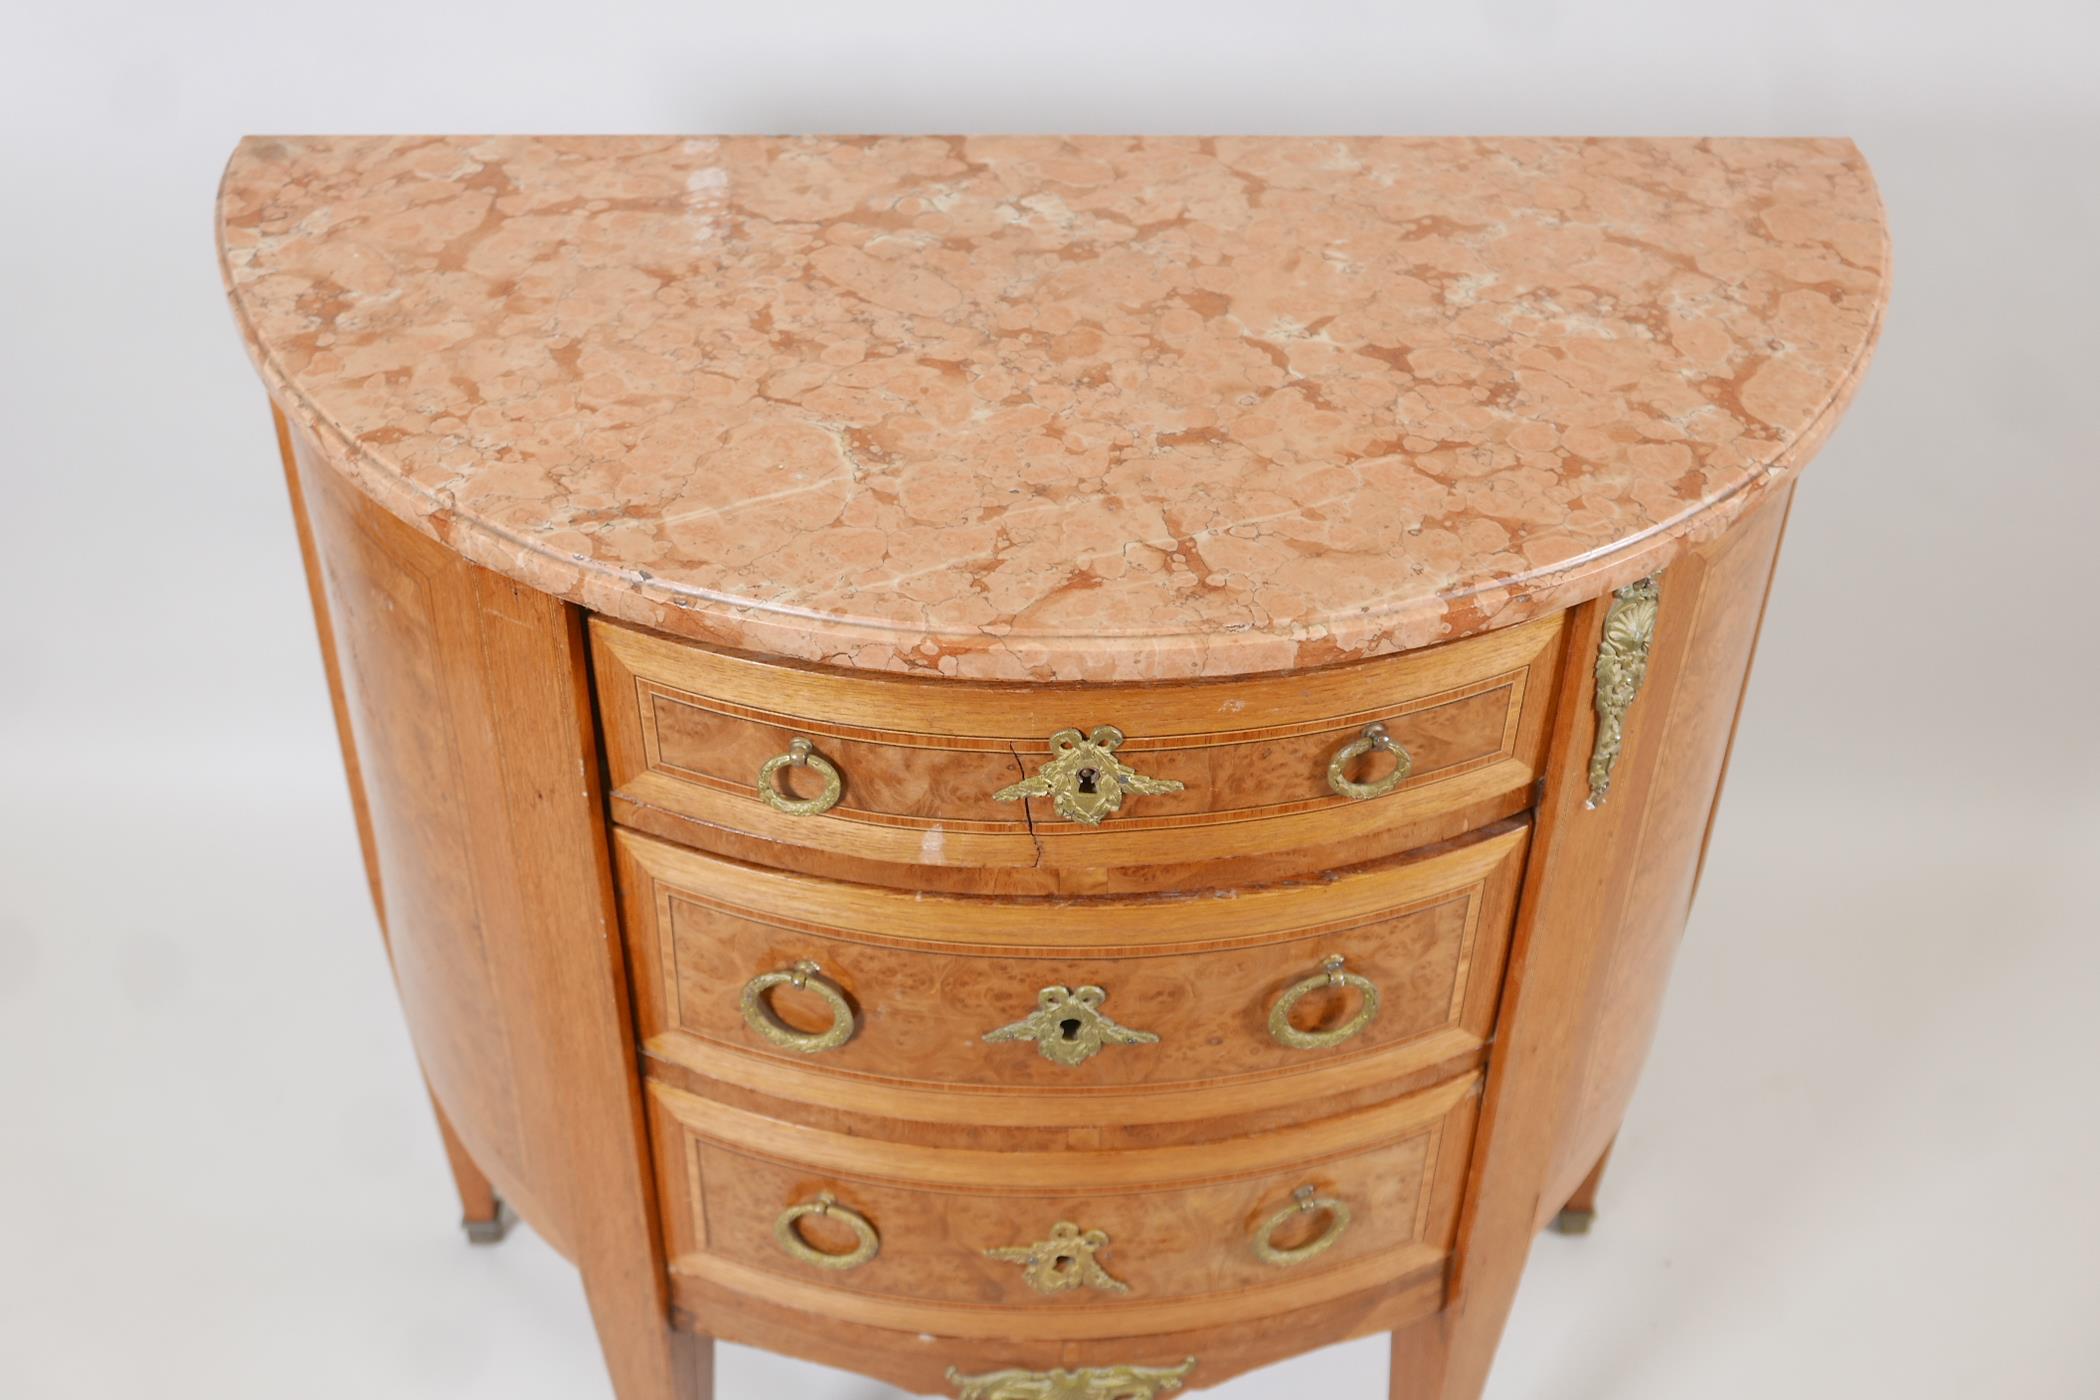 A Louis XV style demi-lune three drawer commode, with inset burr walnut inlaid panels, brass handles - Image 3 of 3